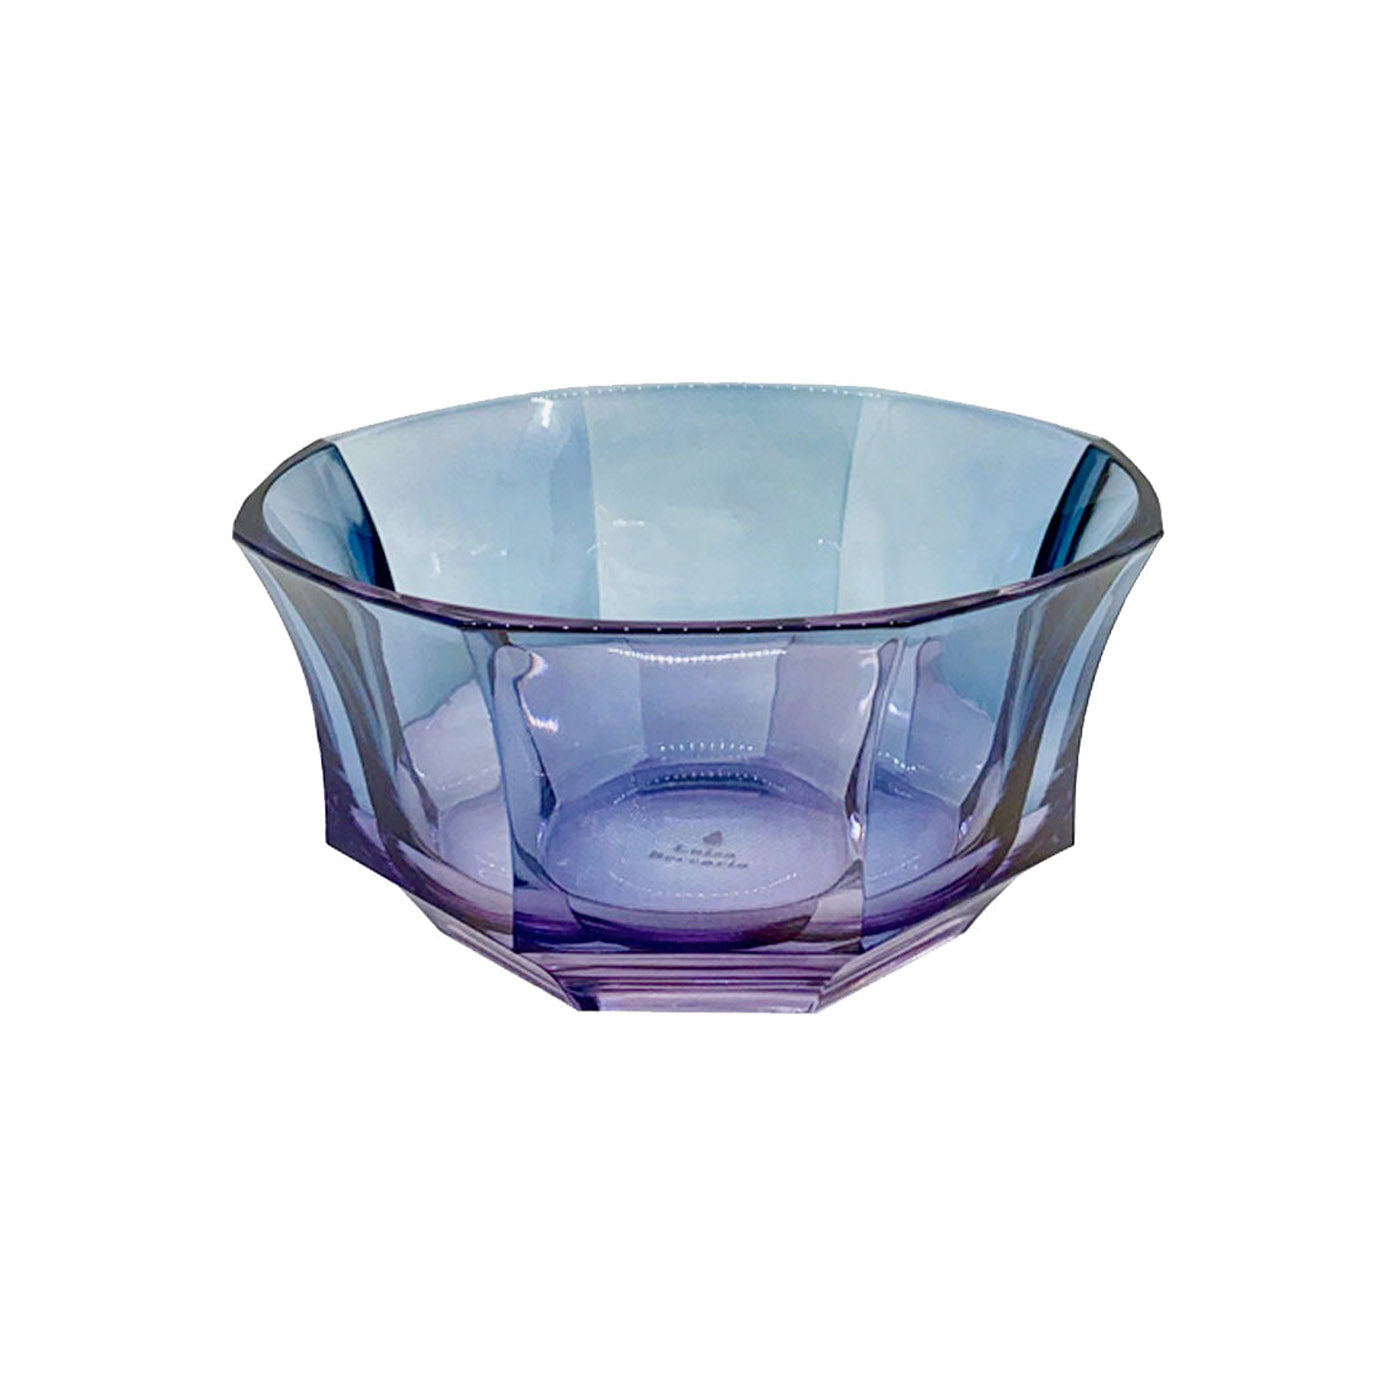 Faceted Purple-To-Blue Crystal Dessert Bowl - Alternative view 1